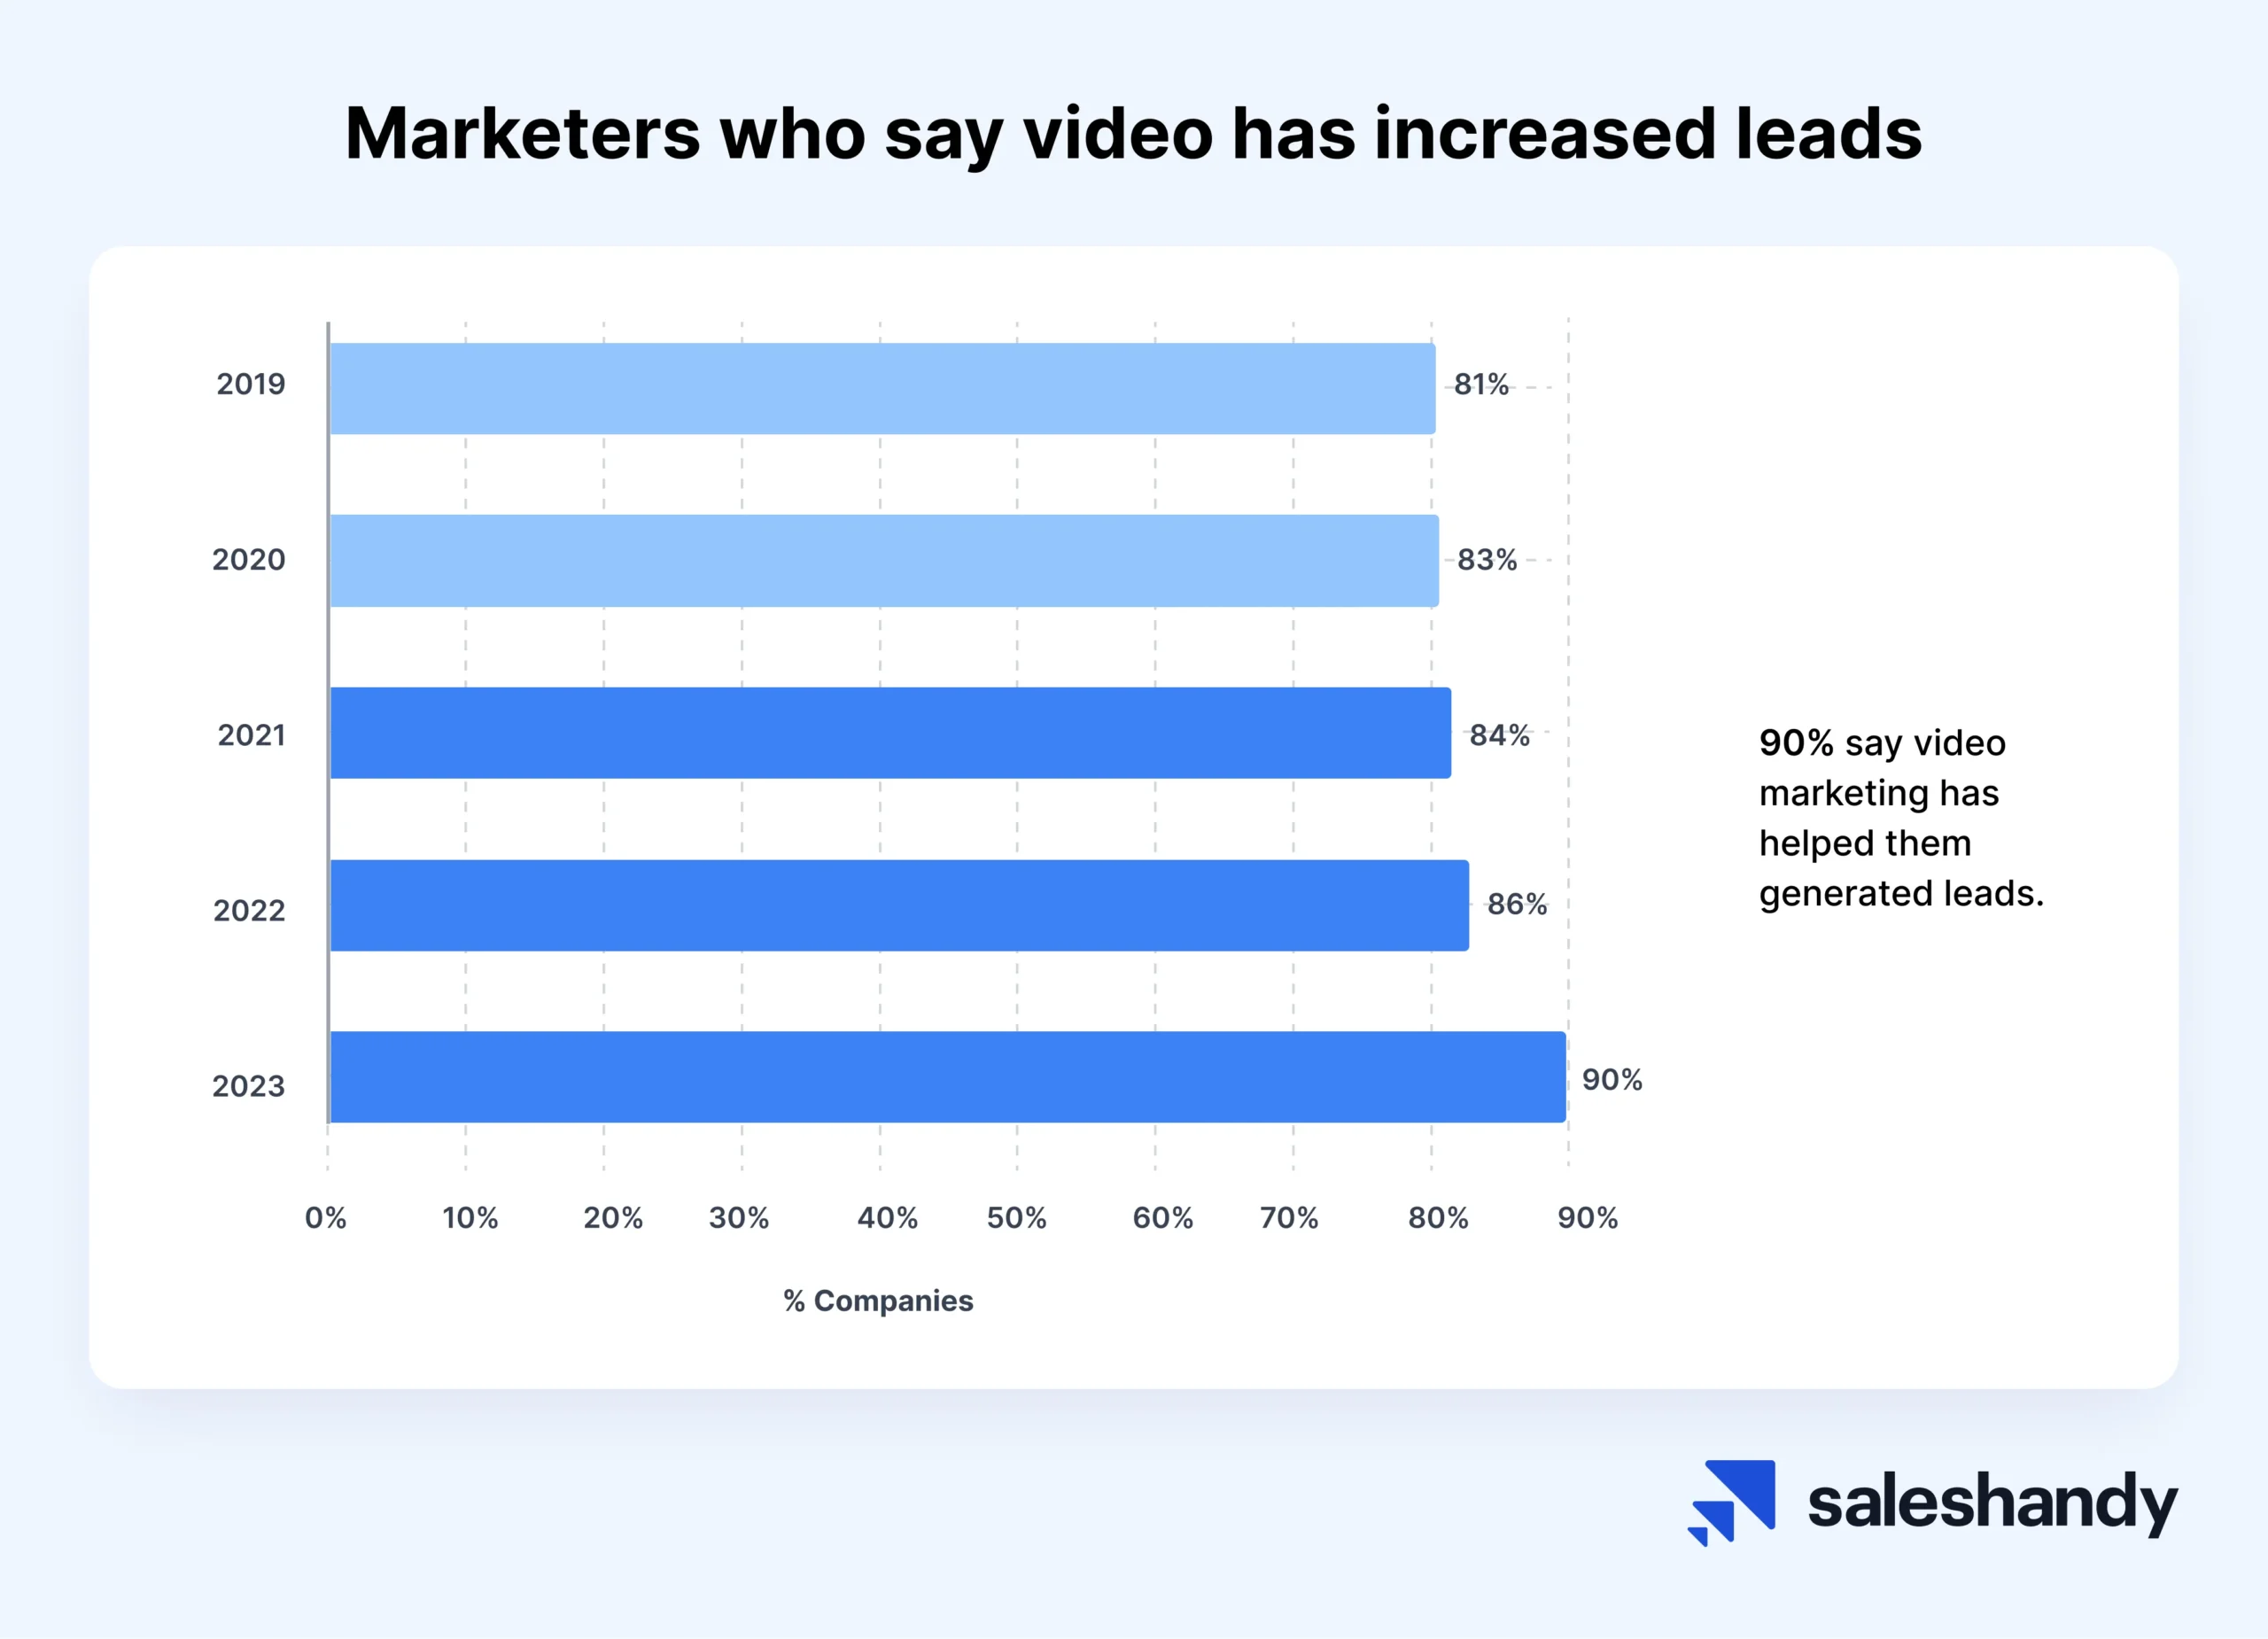 Video has increased leads